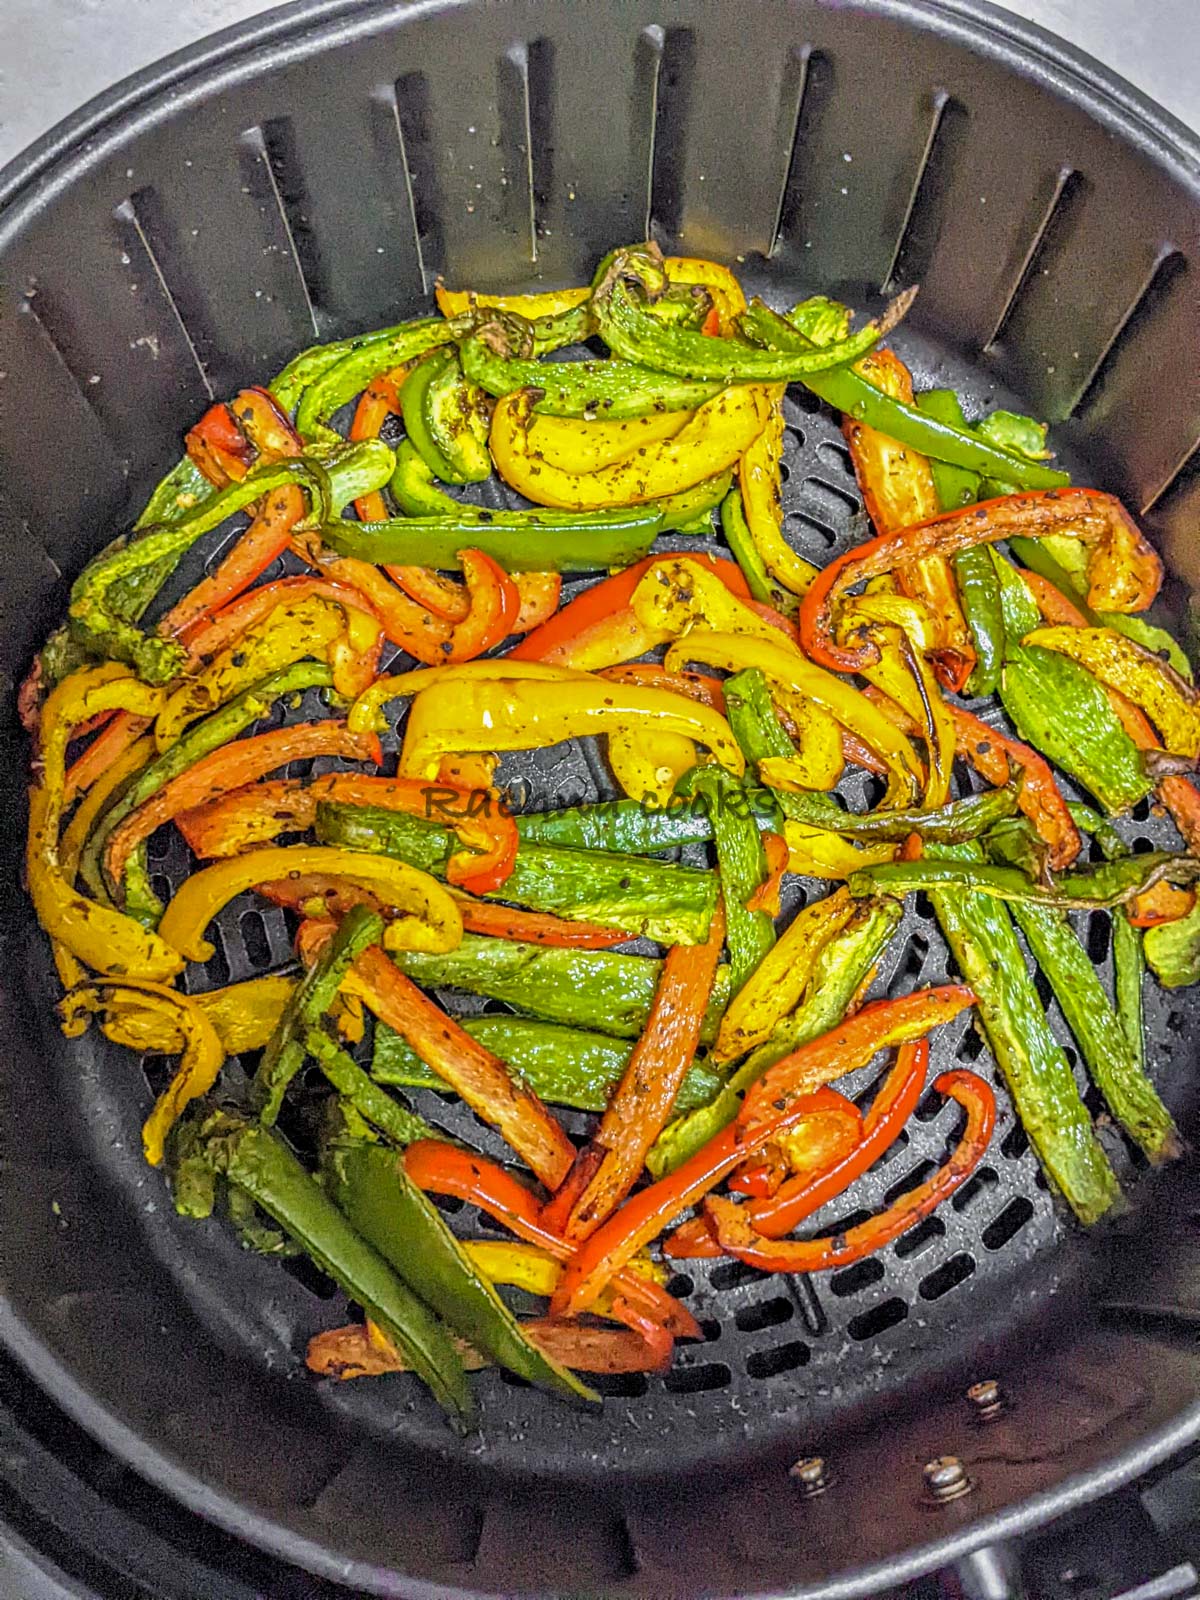 Peppers after air frying in air fryer basket.